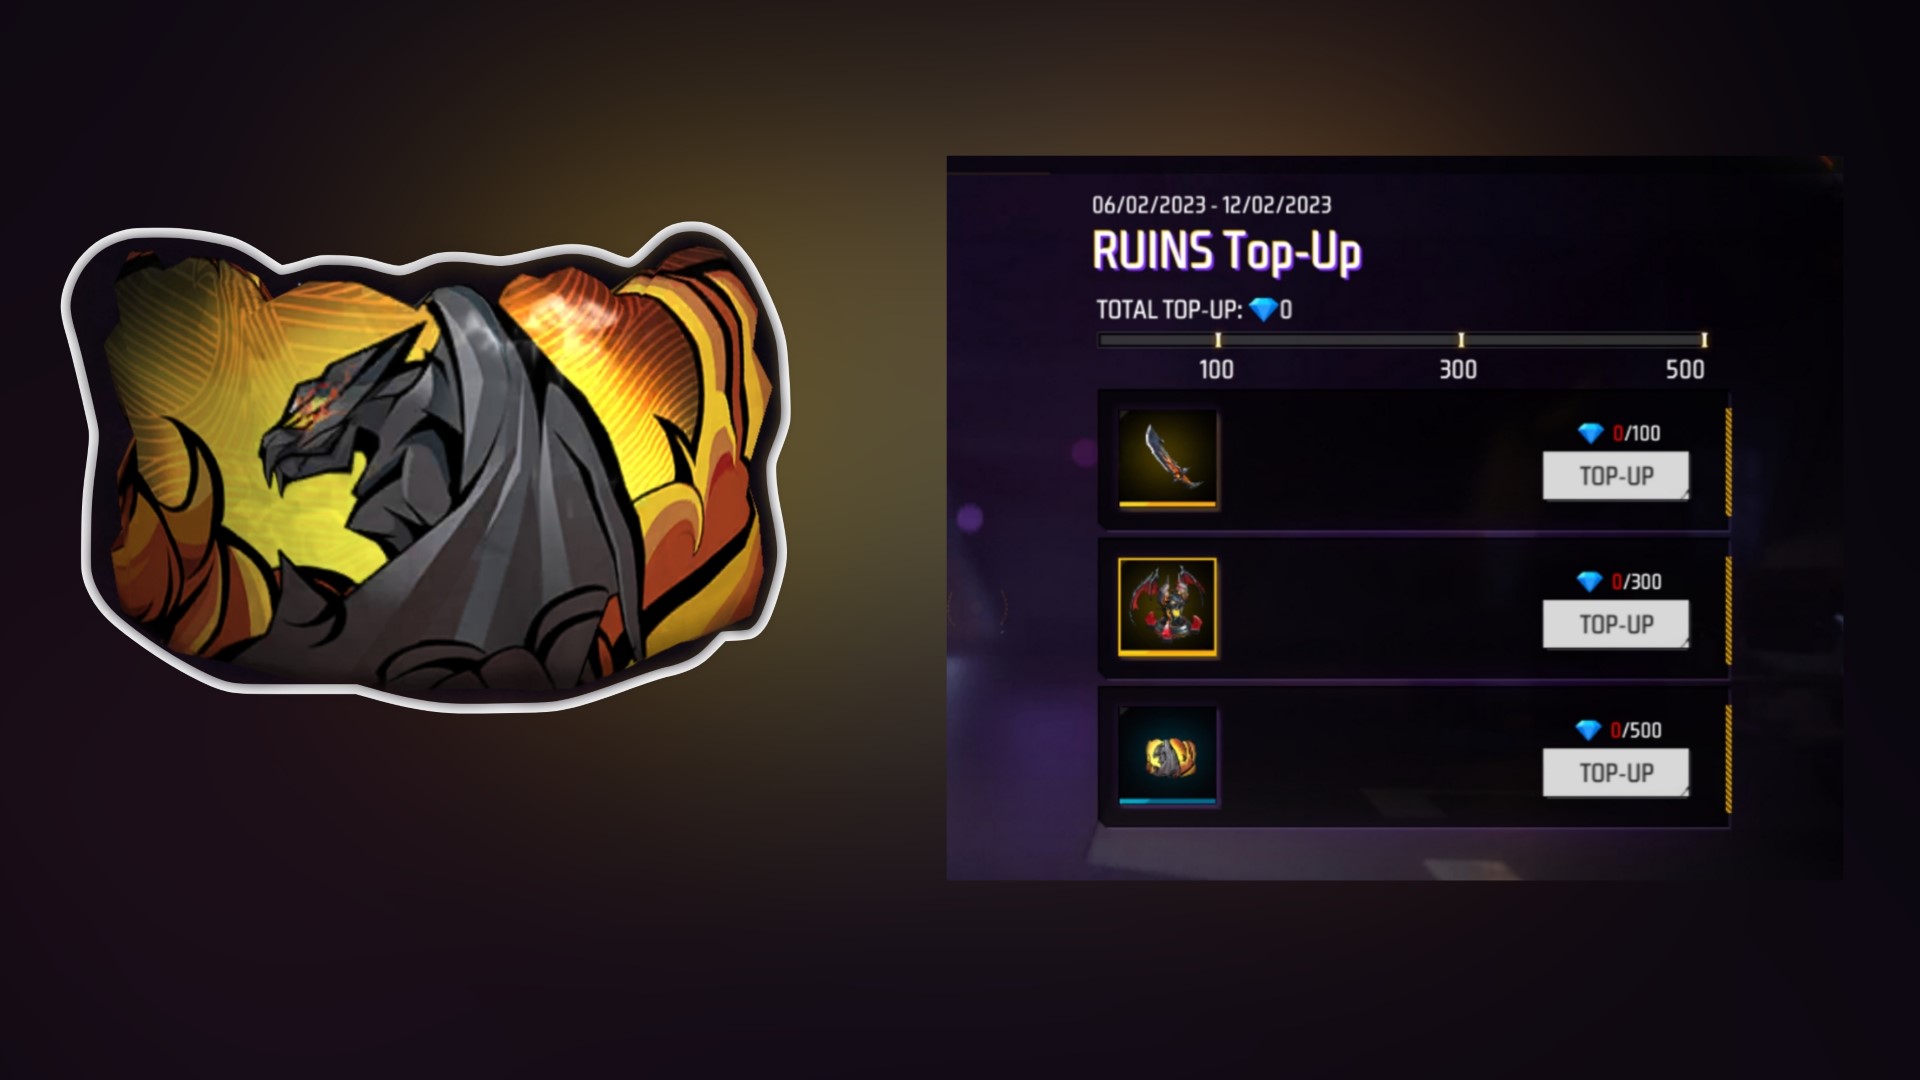 Ruins Top-Up Event